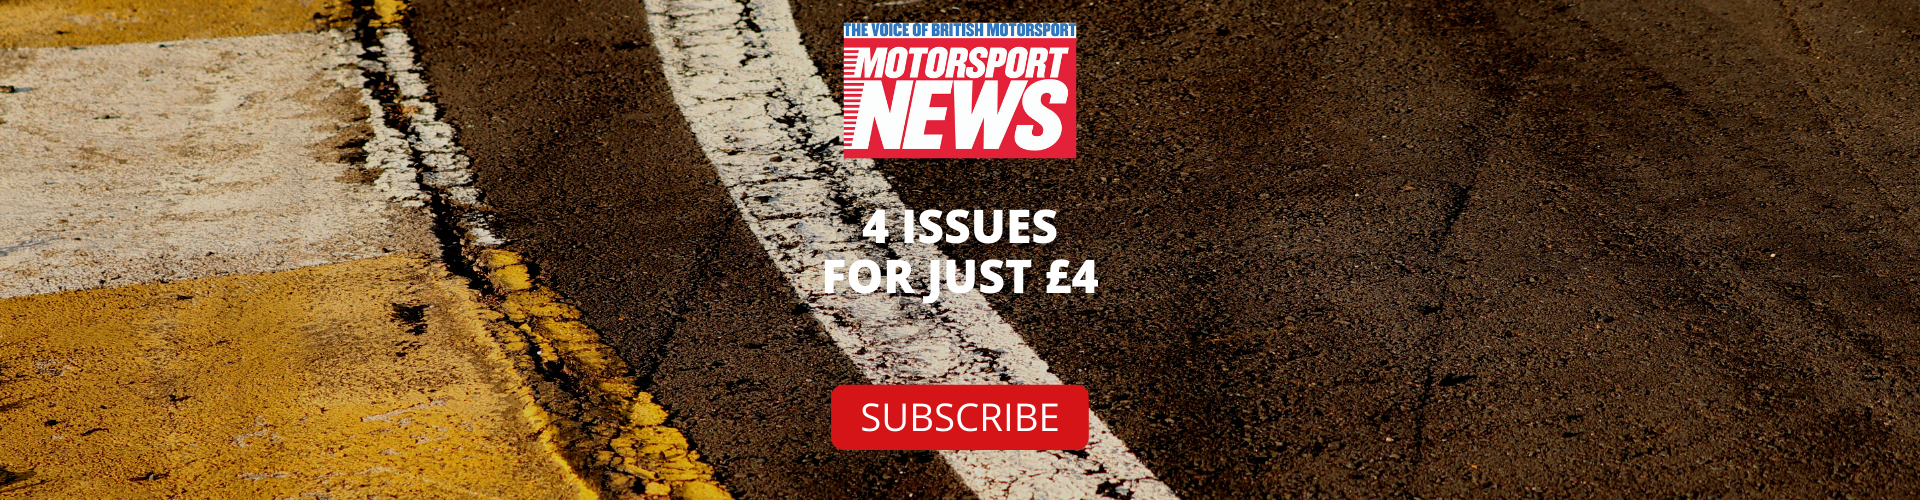 Motorsports News - 4 issues for £4